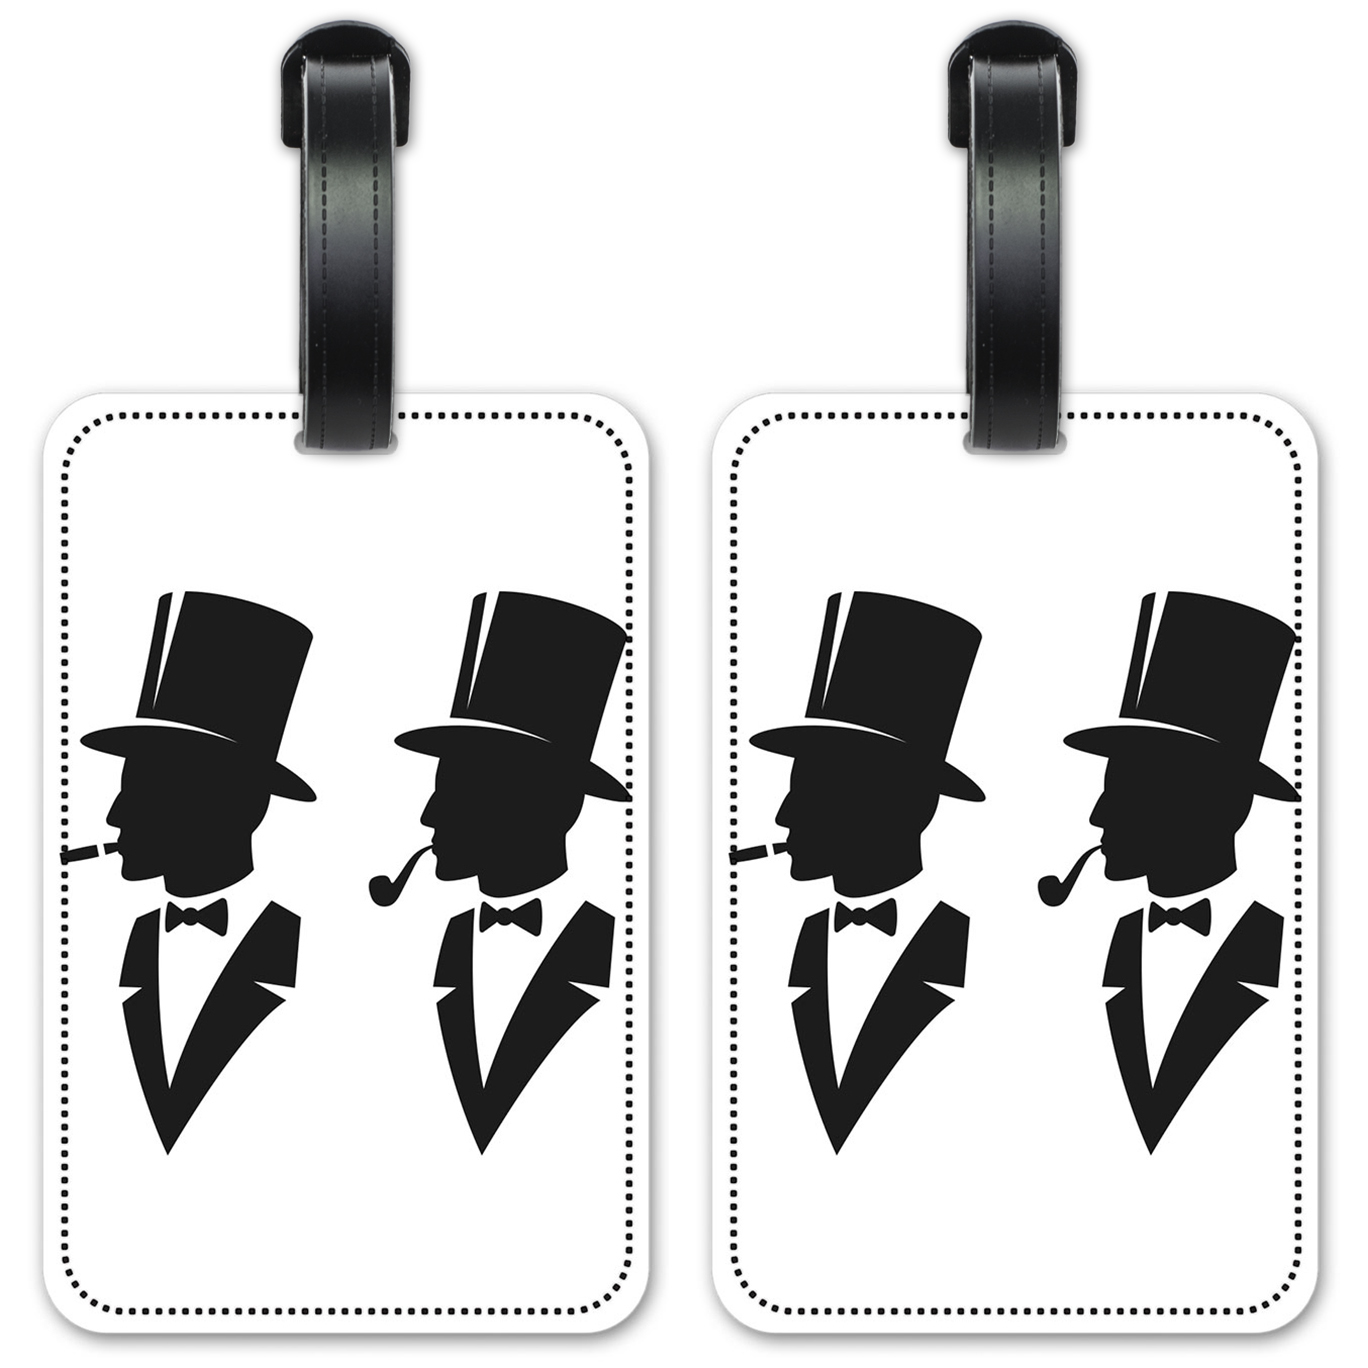 Man in a Top Hat - Luggage ID Tags / Suitcase Identification Cards - Set of 2 - image 1 of 5